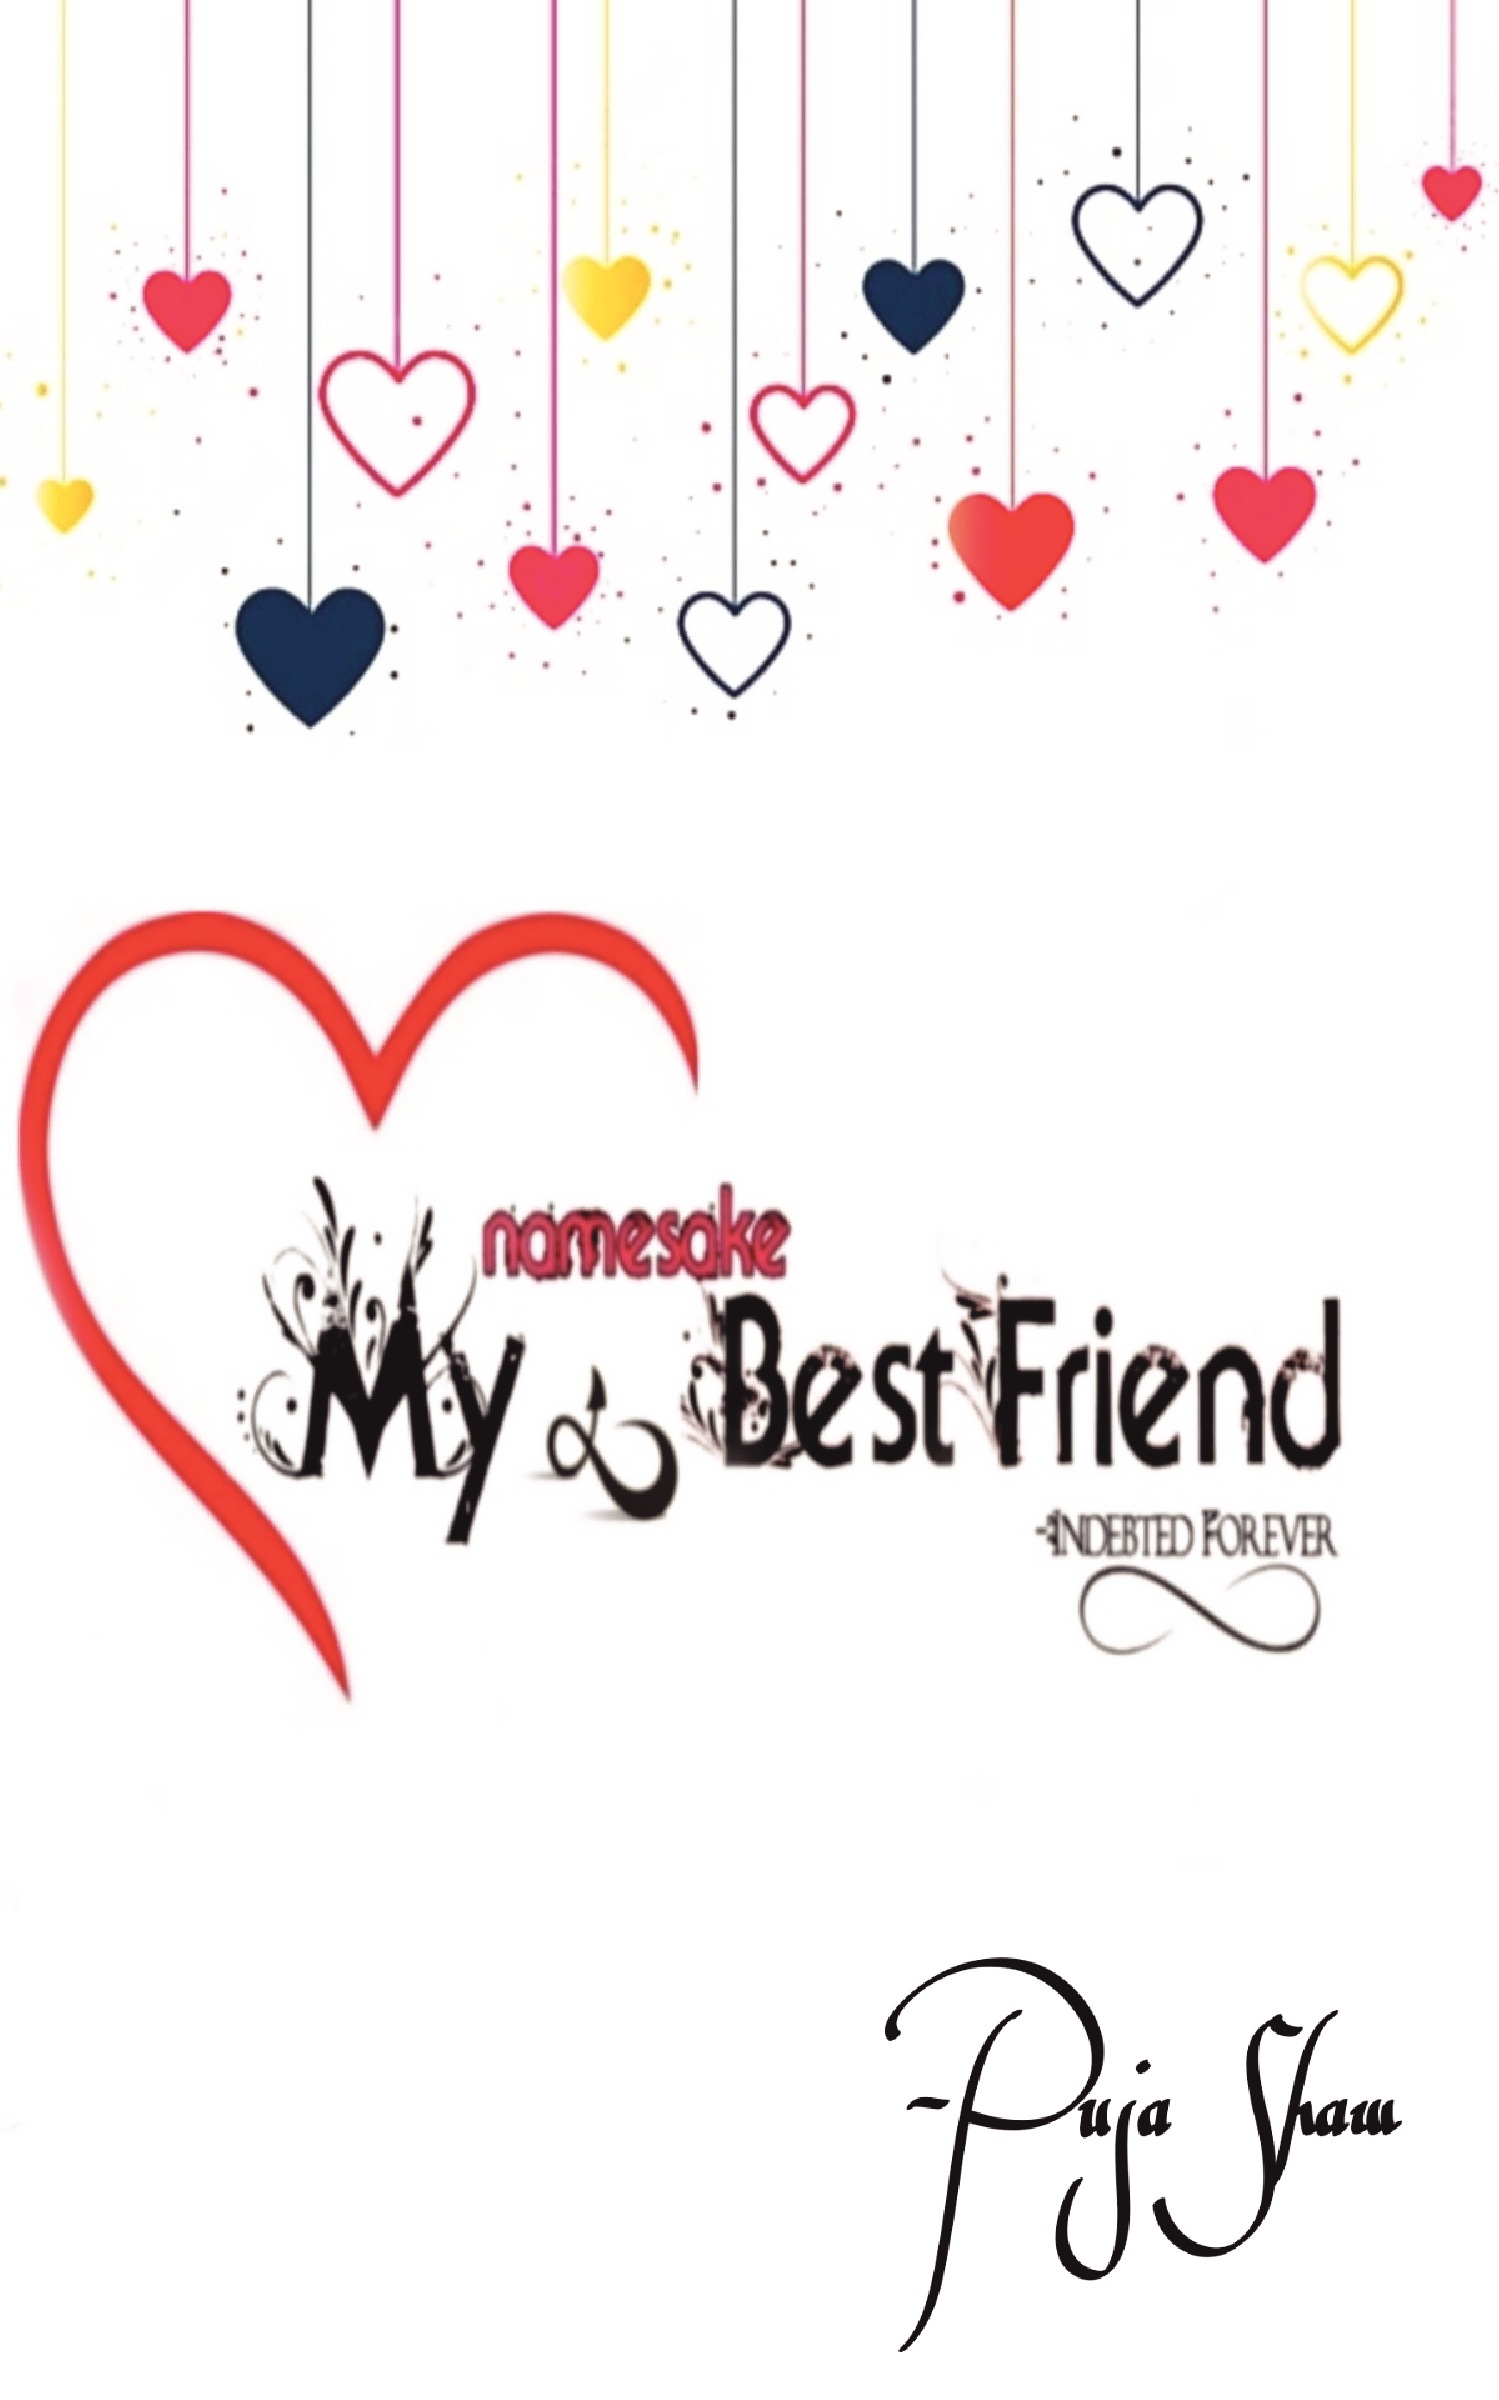 you are my best friend forever images